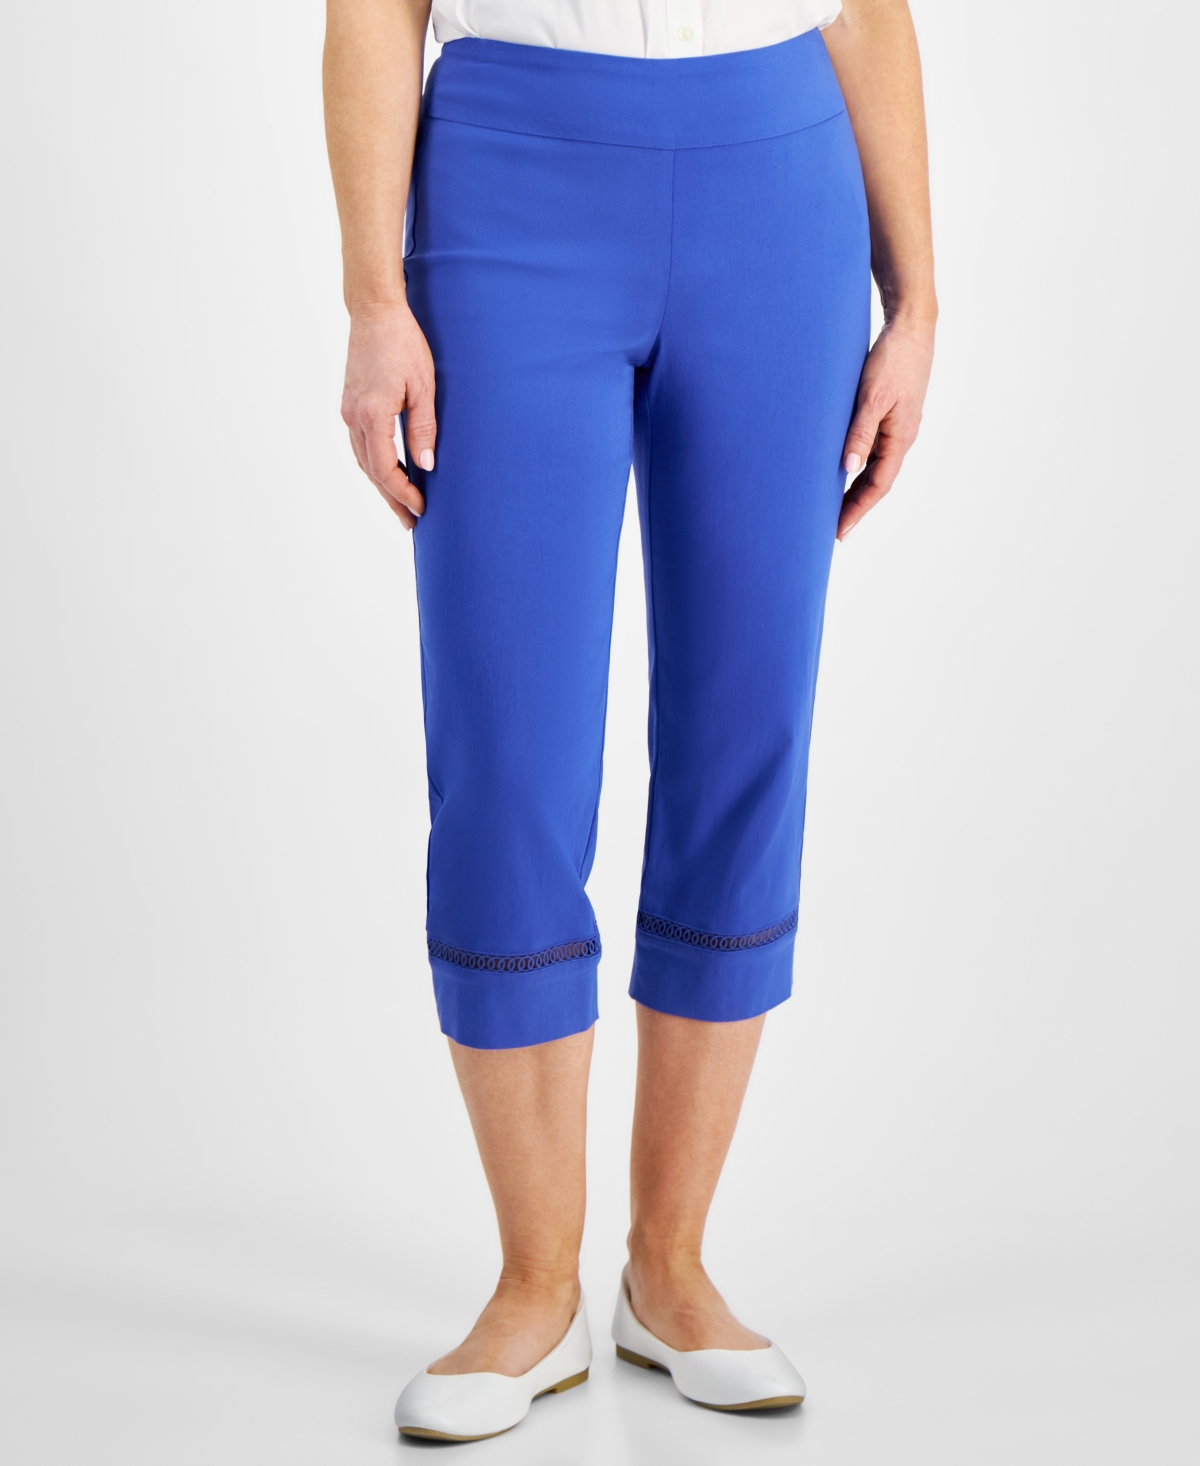 Jm Collection Petite Mid Rise Pull-on Capri Pants, Created For Macy's In Demure Blue